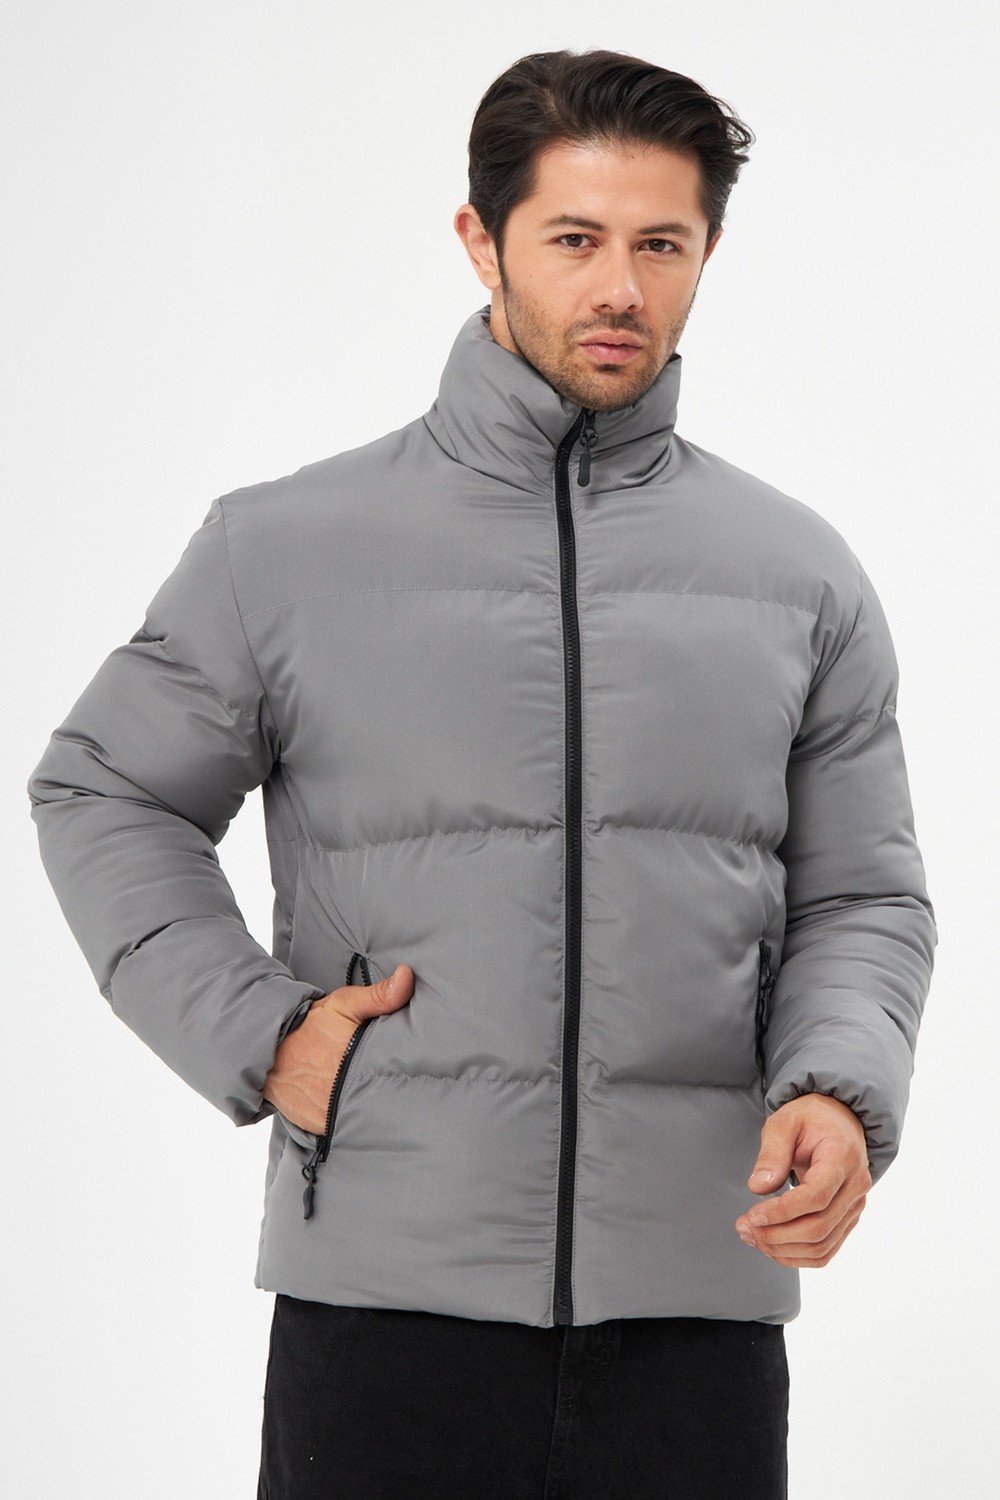 D1fference Men's Gray Inner Lined Water And Windproof Puffy Winter Coat.